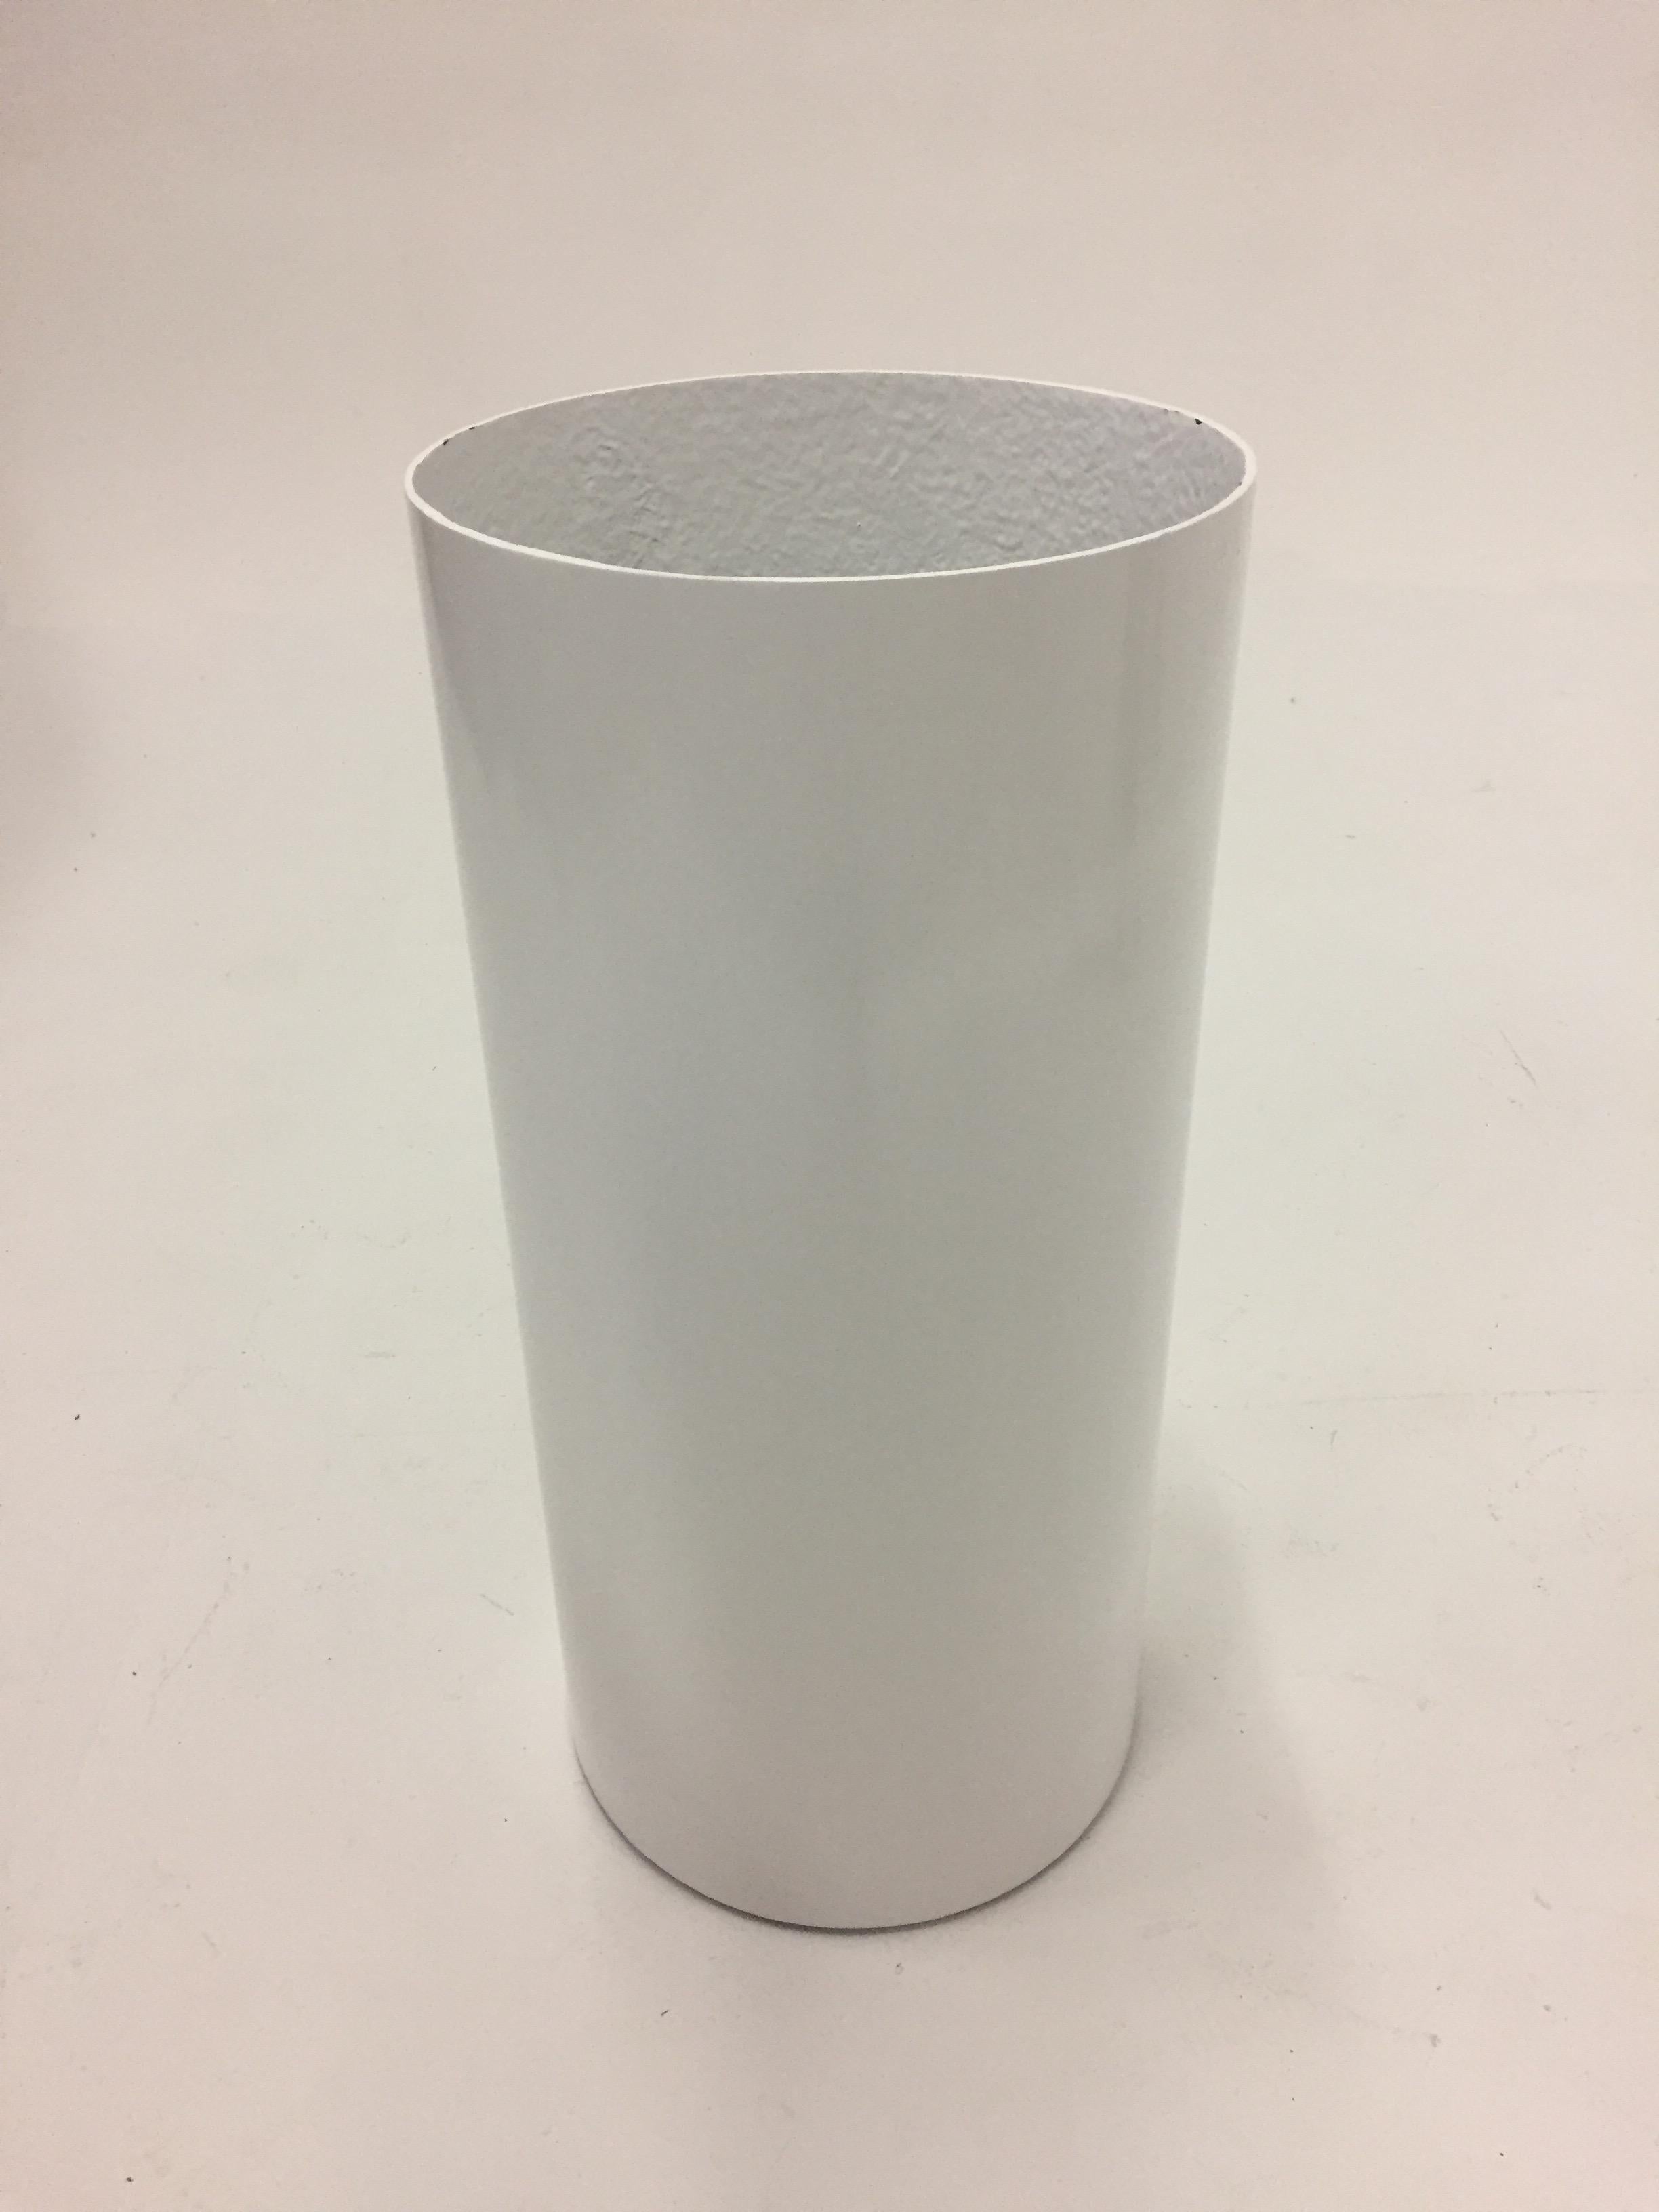 A cool white lacquered fiberglass pedestal with a 2.5